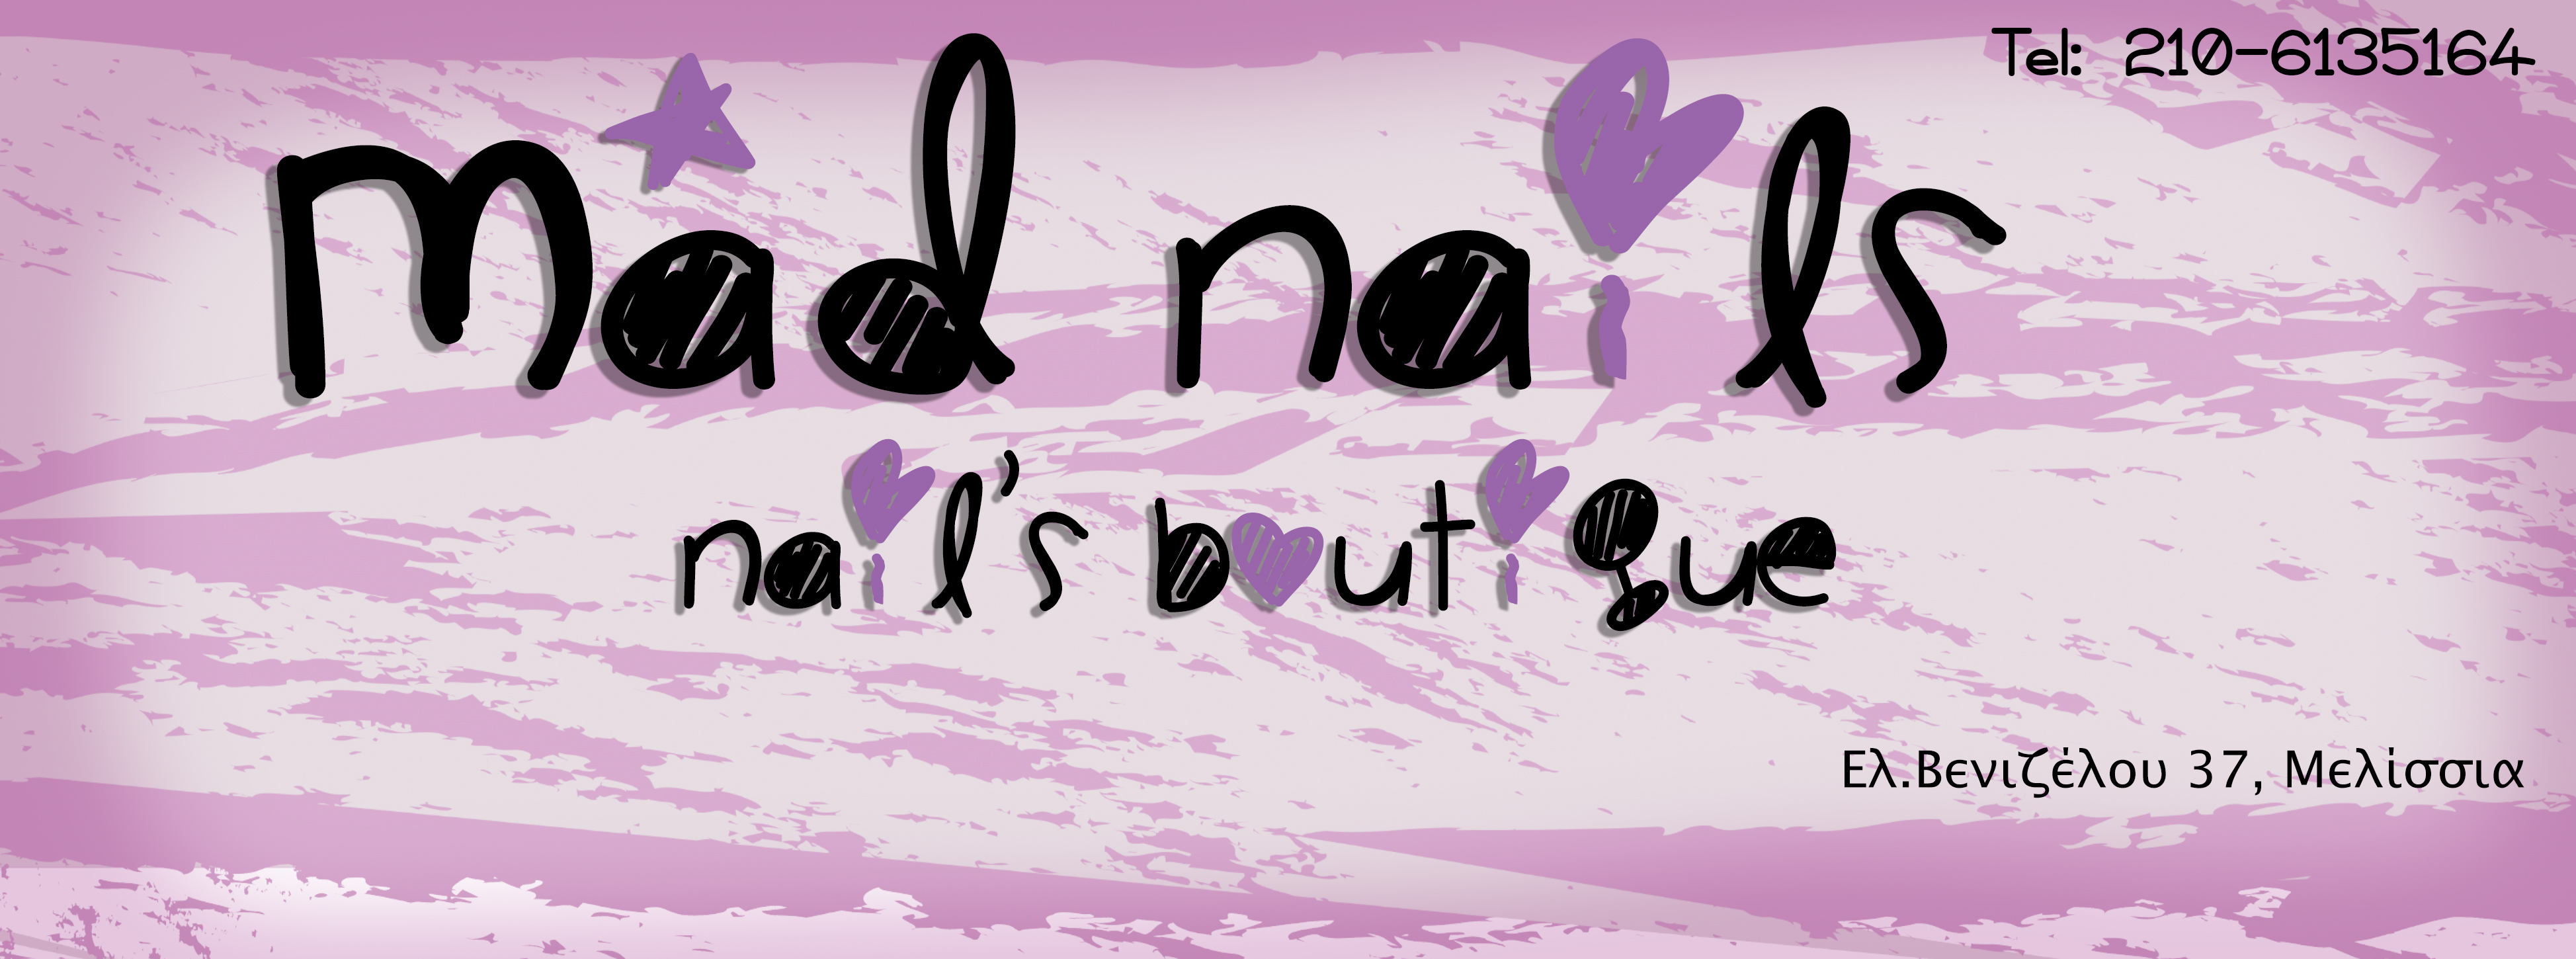 nails cover.jpg